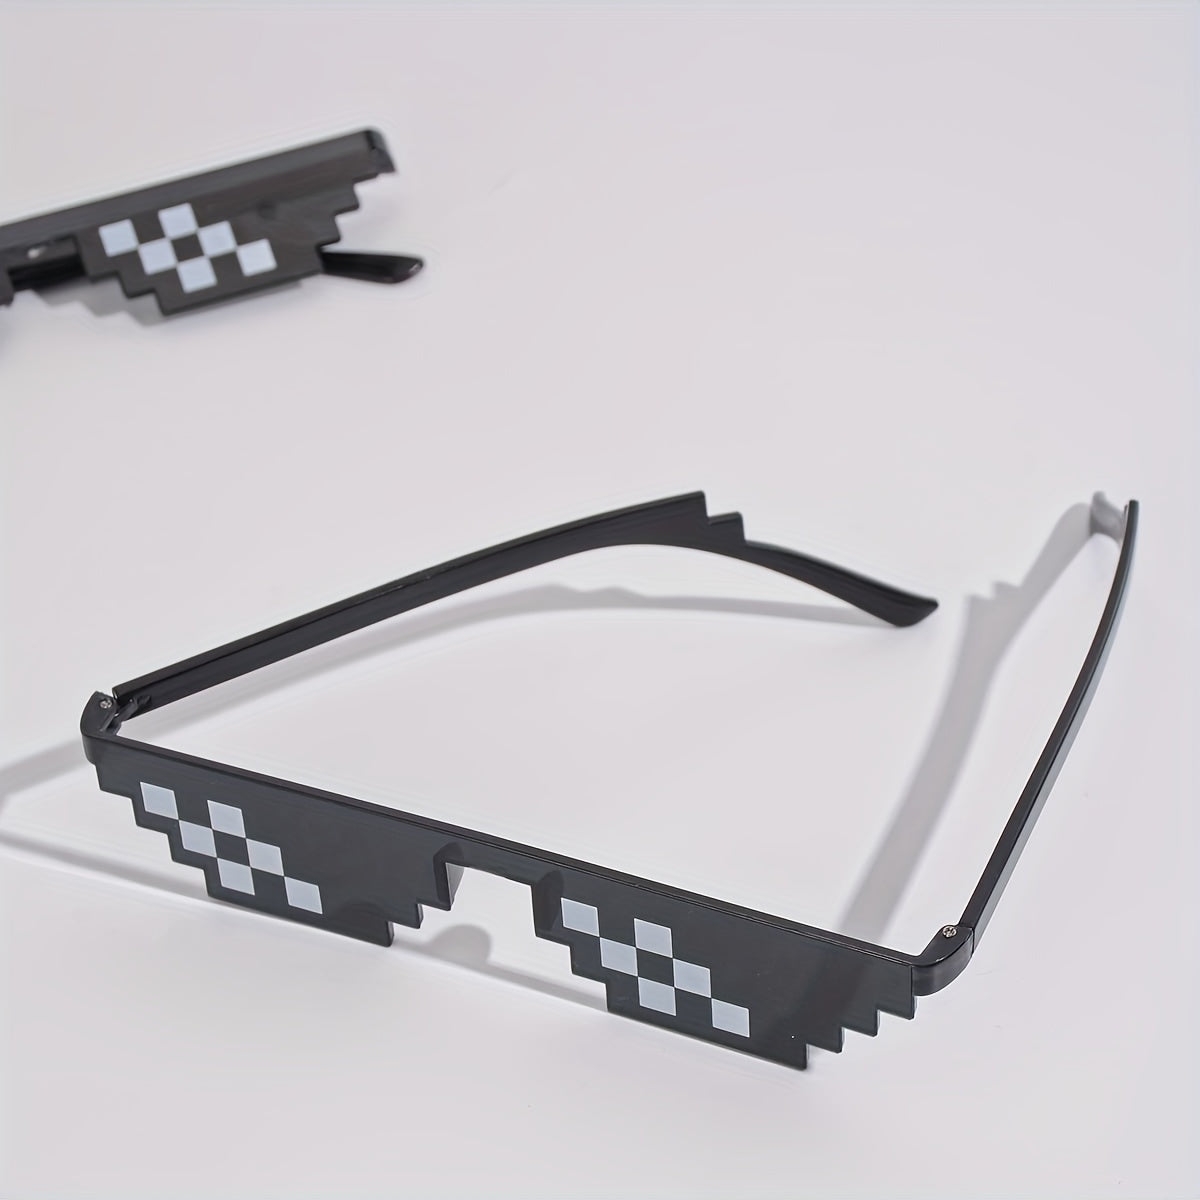 Festival Party Props Party Photo Props Mosaic Funny Party Glasses Anime Pixel Glasses, Cheap Stuff, Weird Stuff, Mini Stuff, Cute Aesthetic Stuff, Cool Gadgets, Unusual Items, Party Decor, Party Supplies 1pc,Xmas New Year Gifts